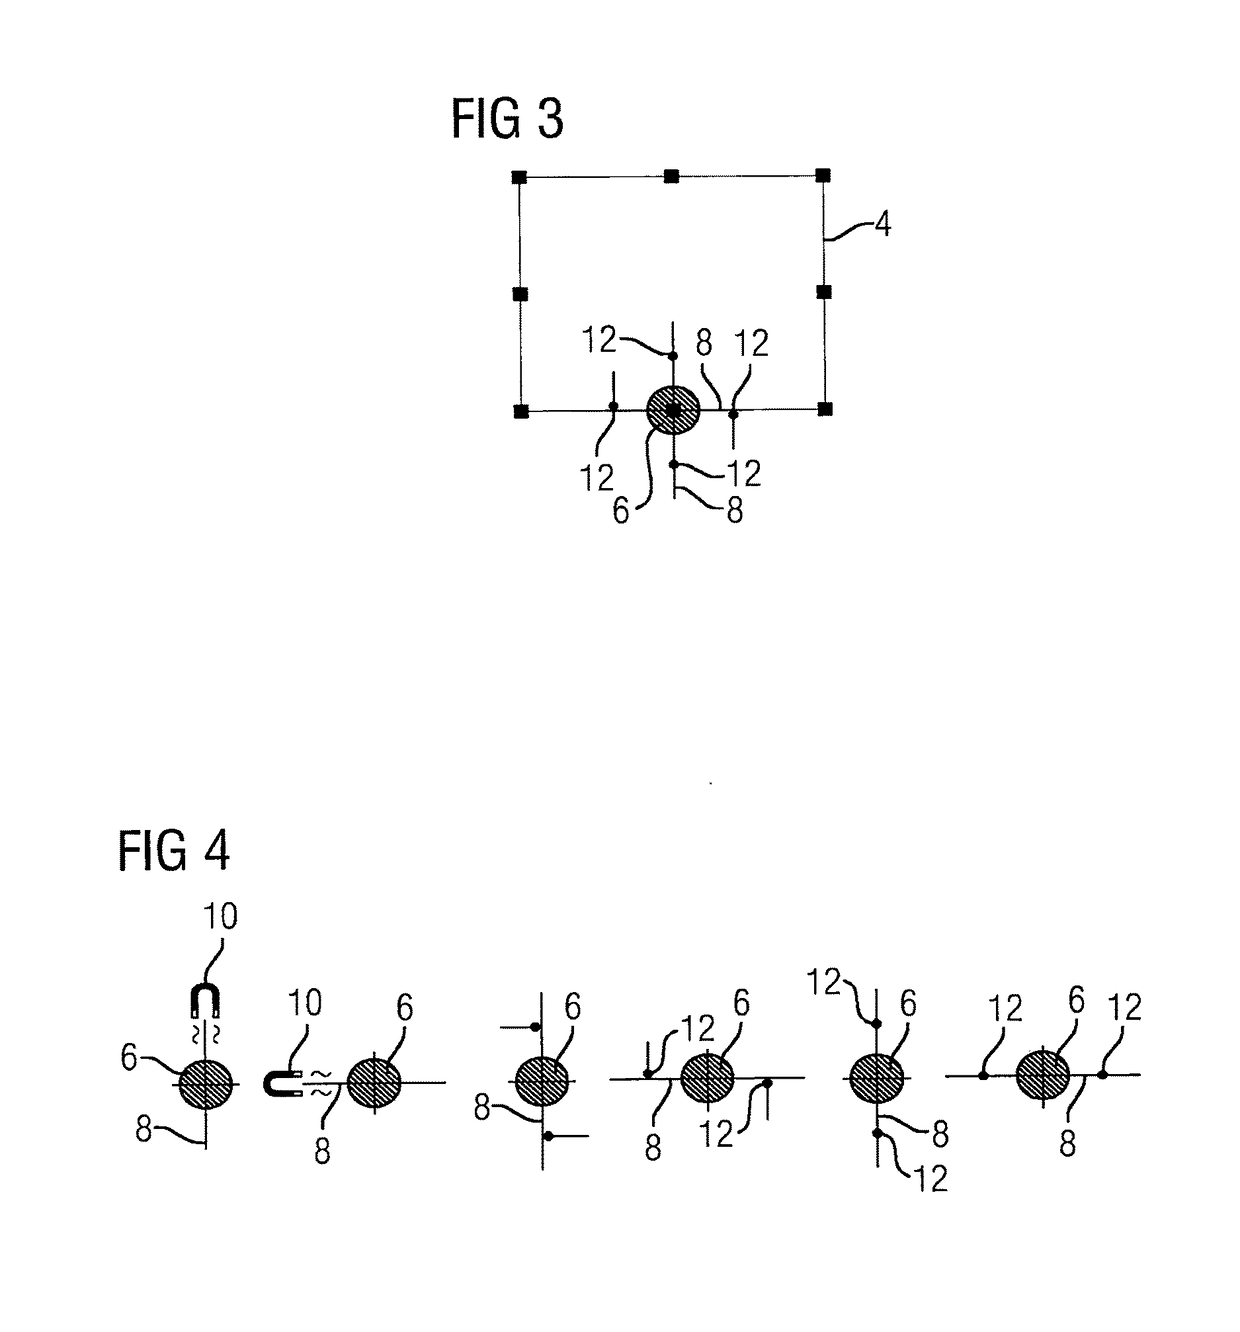 Method for Automatically Establishing a Data Record Characterizing Two Technical Drawings